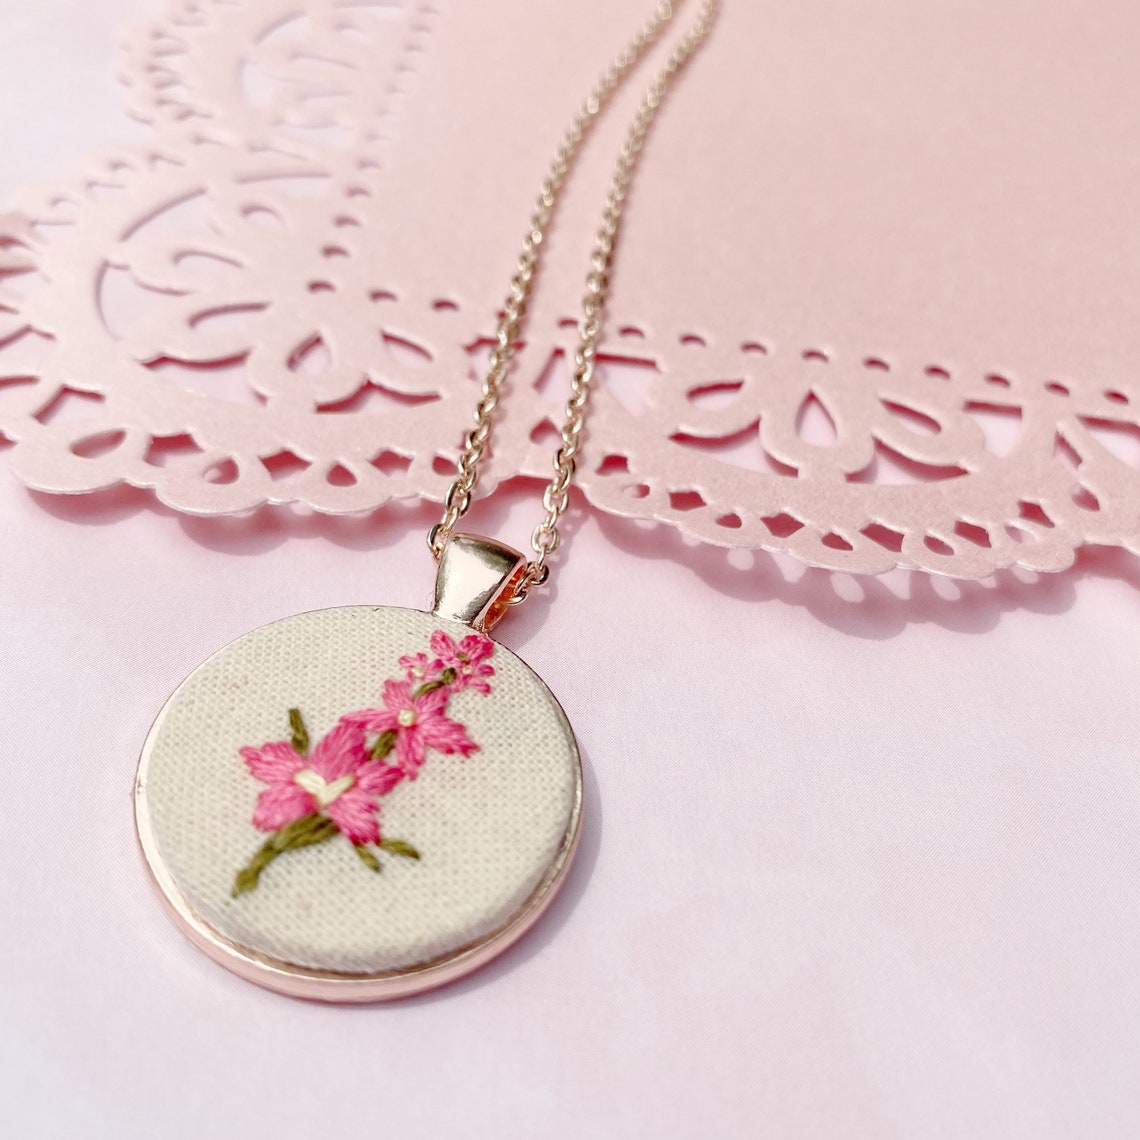 August. Gladiolus Birth Flower Pendant. Embroidered Necklace. | Etsy